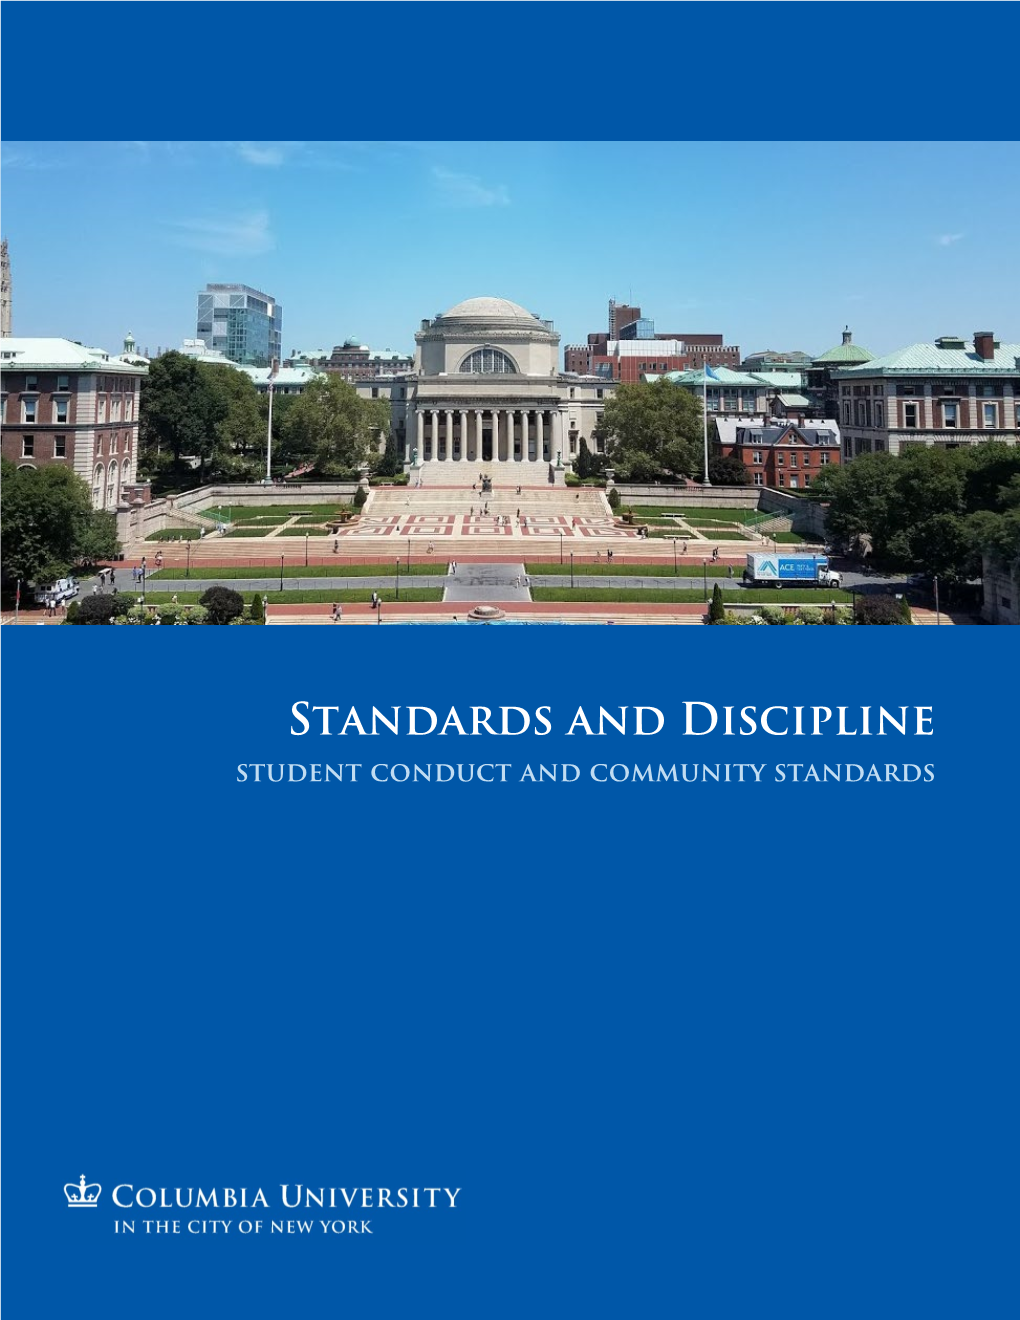 Standards and Discipline Student Conduct and Community Standards